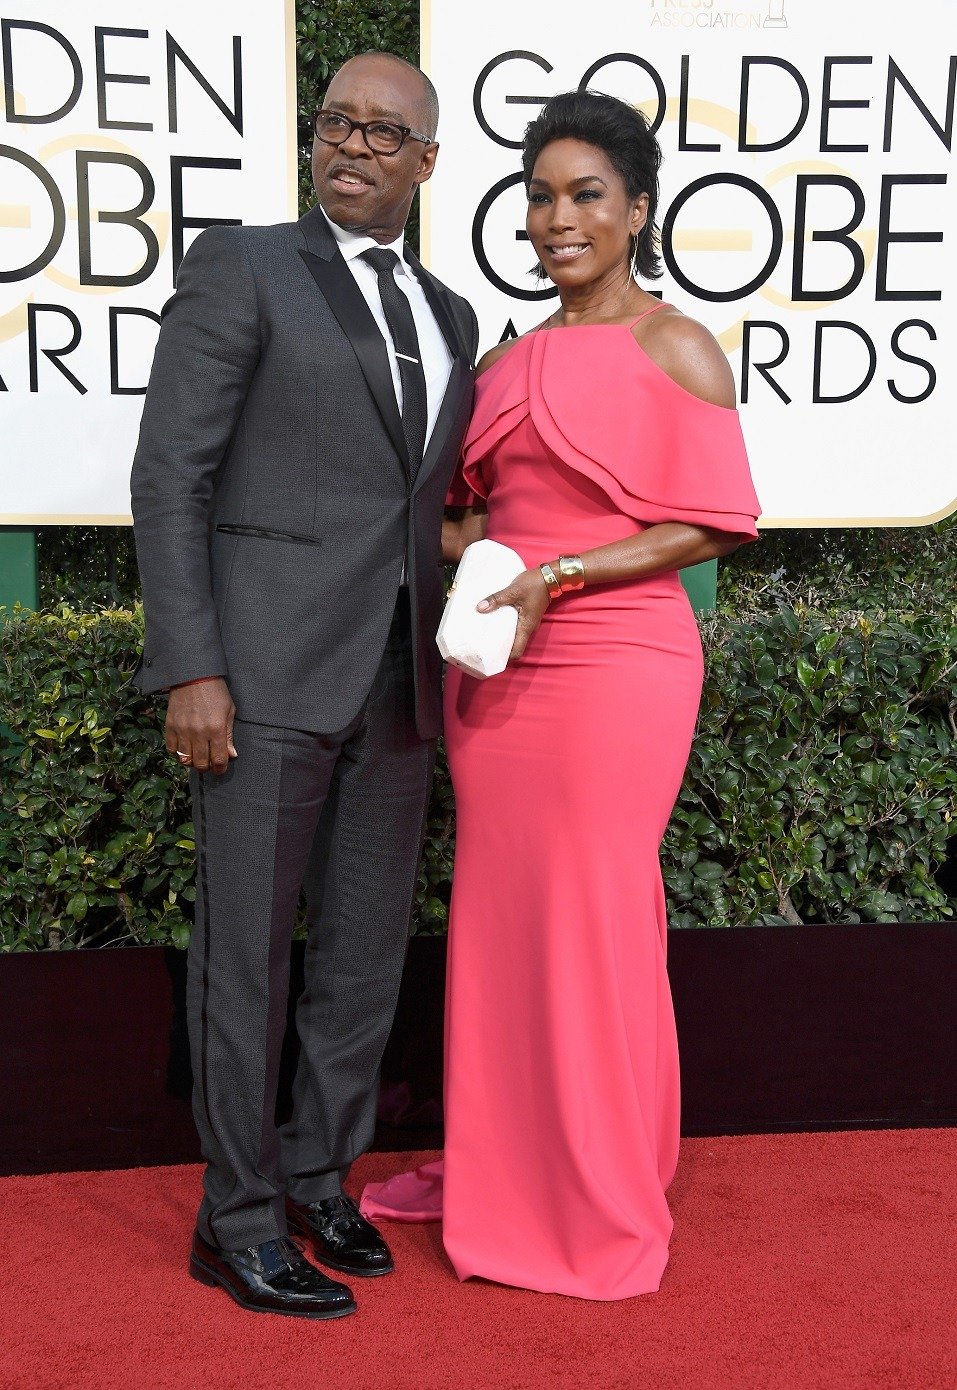 Actors Courtney B. Vance (L) and Angela Bassett attend the 74th Annual Golden Globe Awards